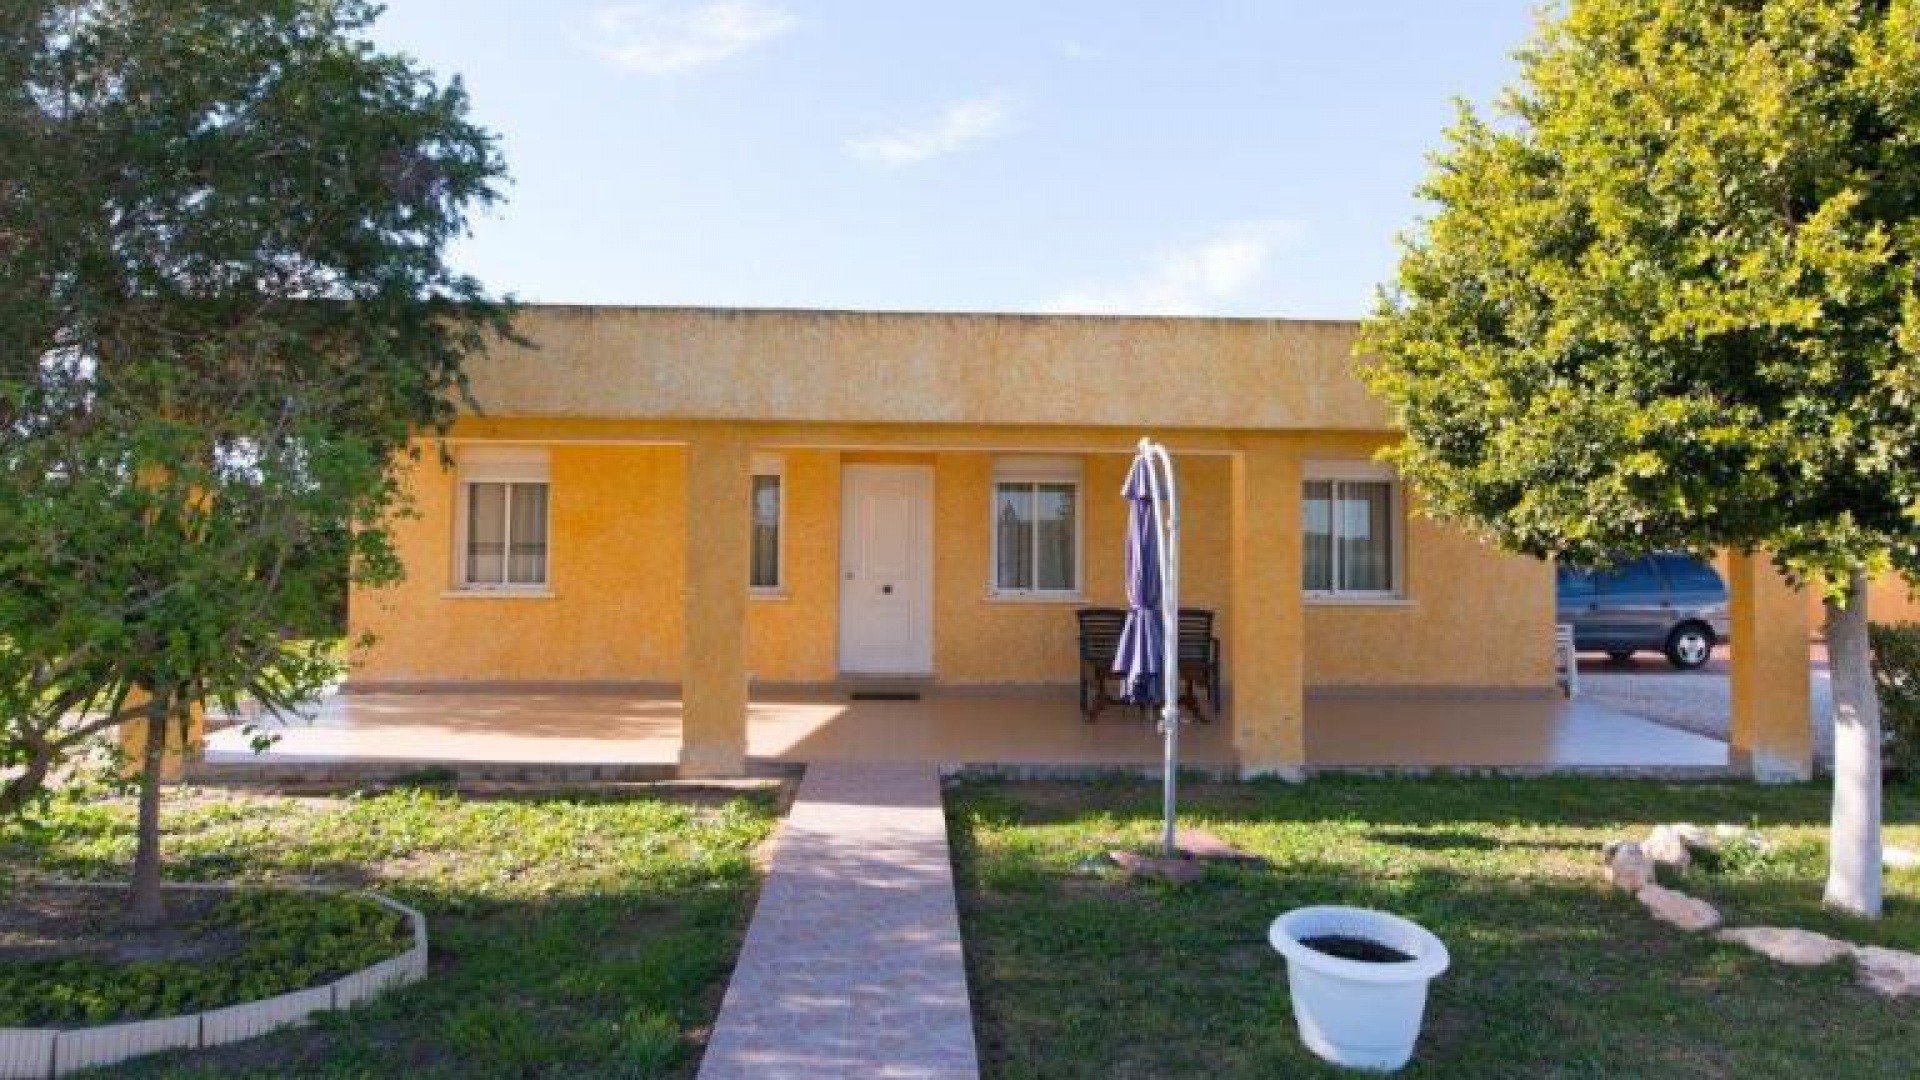 Wederverkoop - Country Property - costa blanca - costa blanca south   country